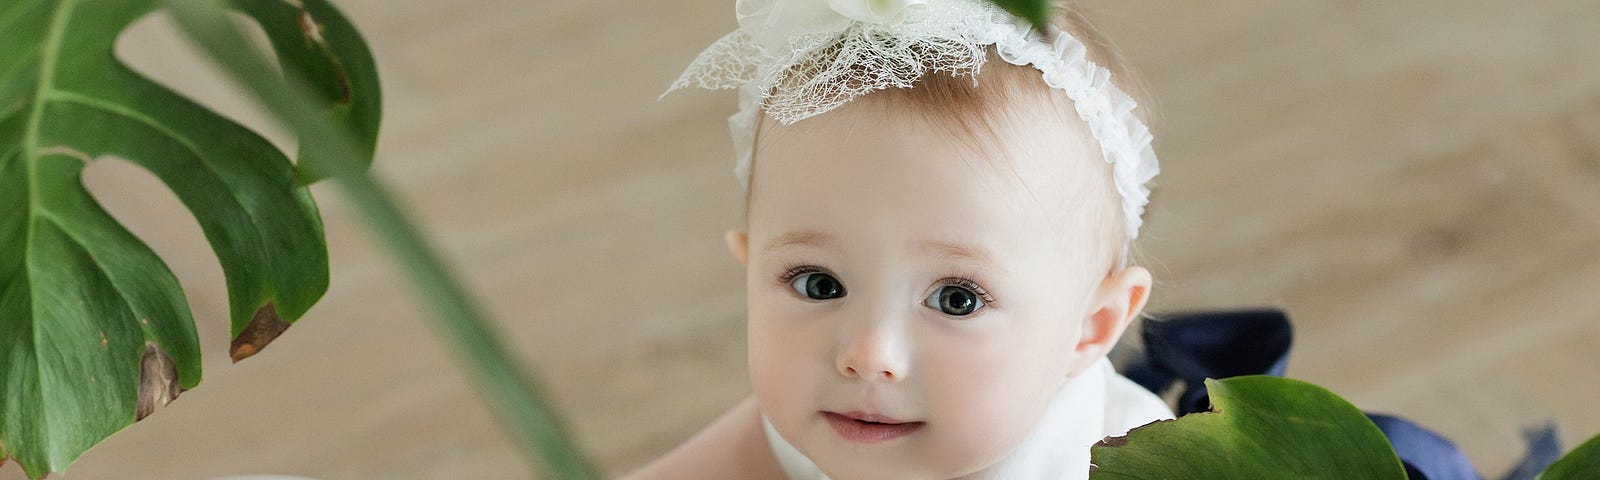 fair baby girl portrait dressed in white, white headband, accented with green leaves as frame